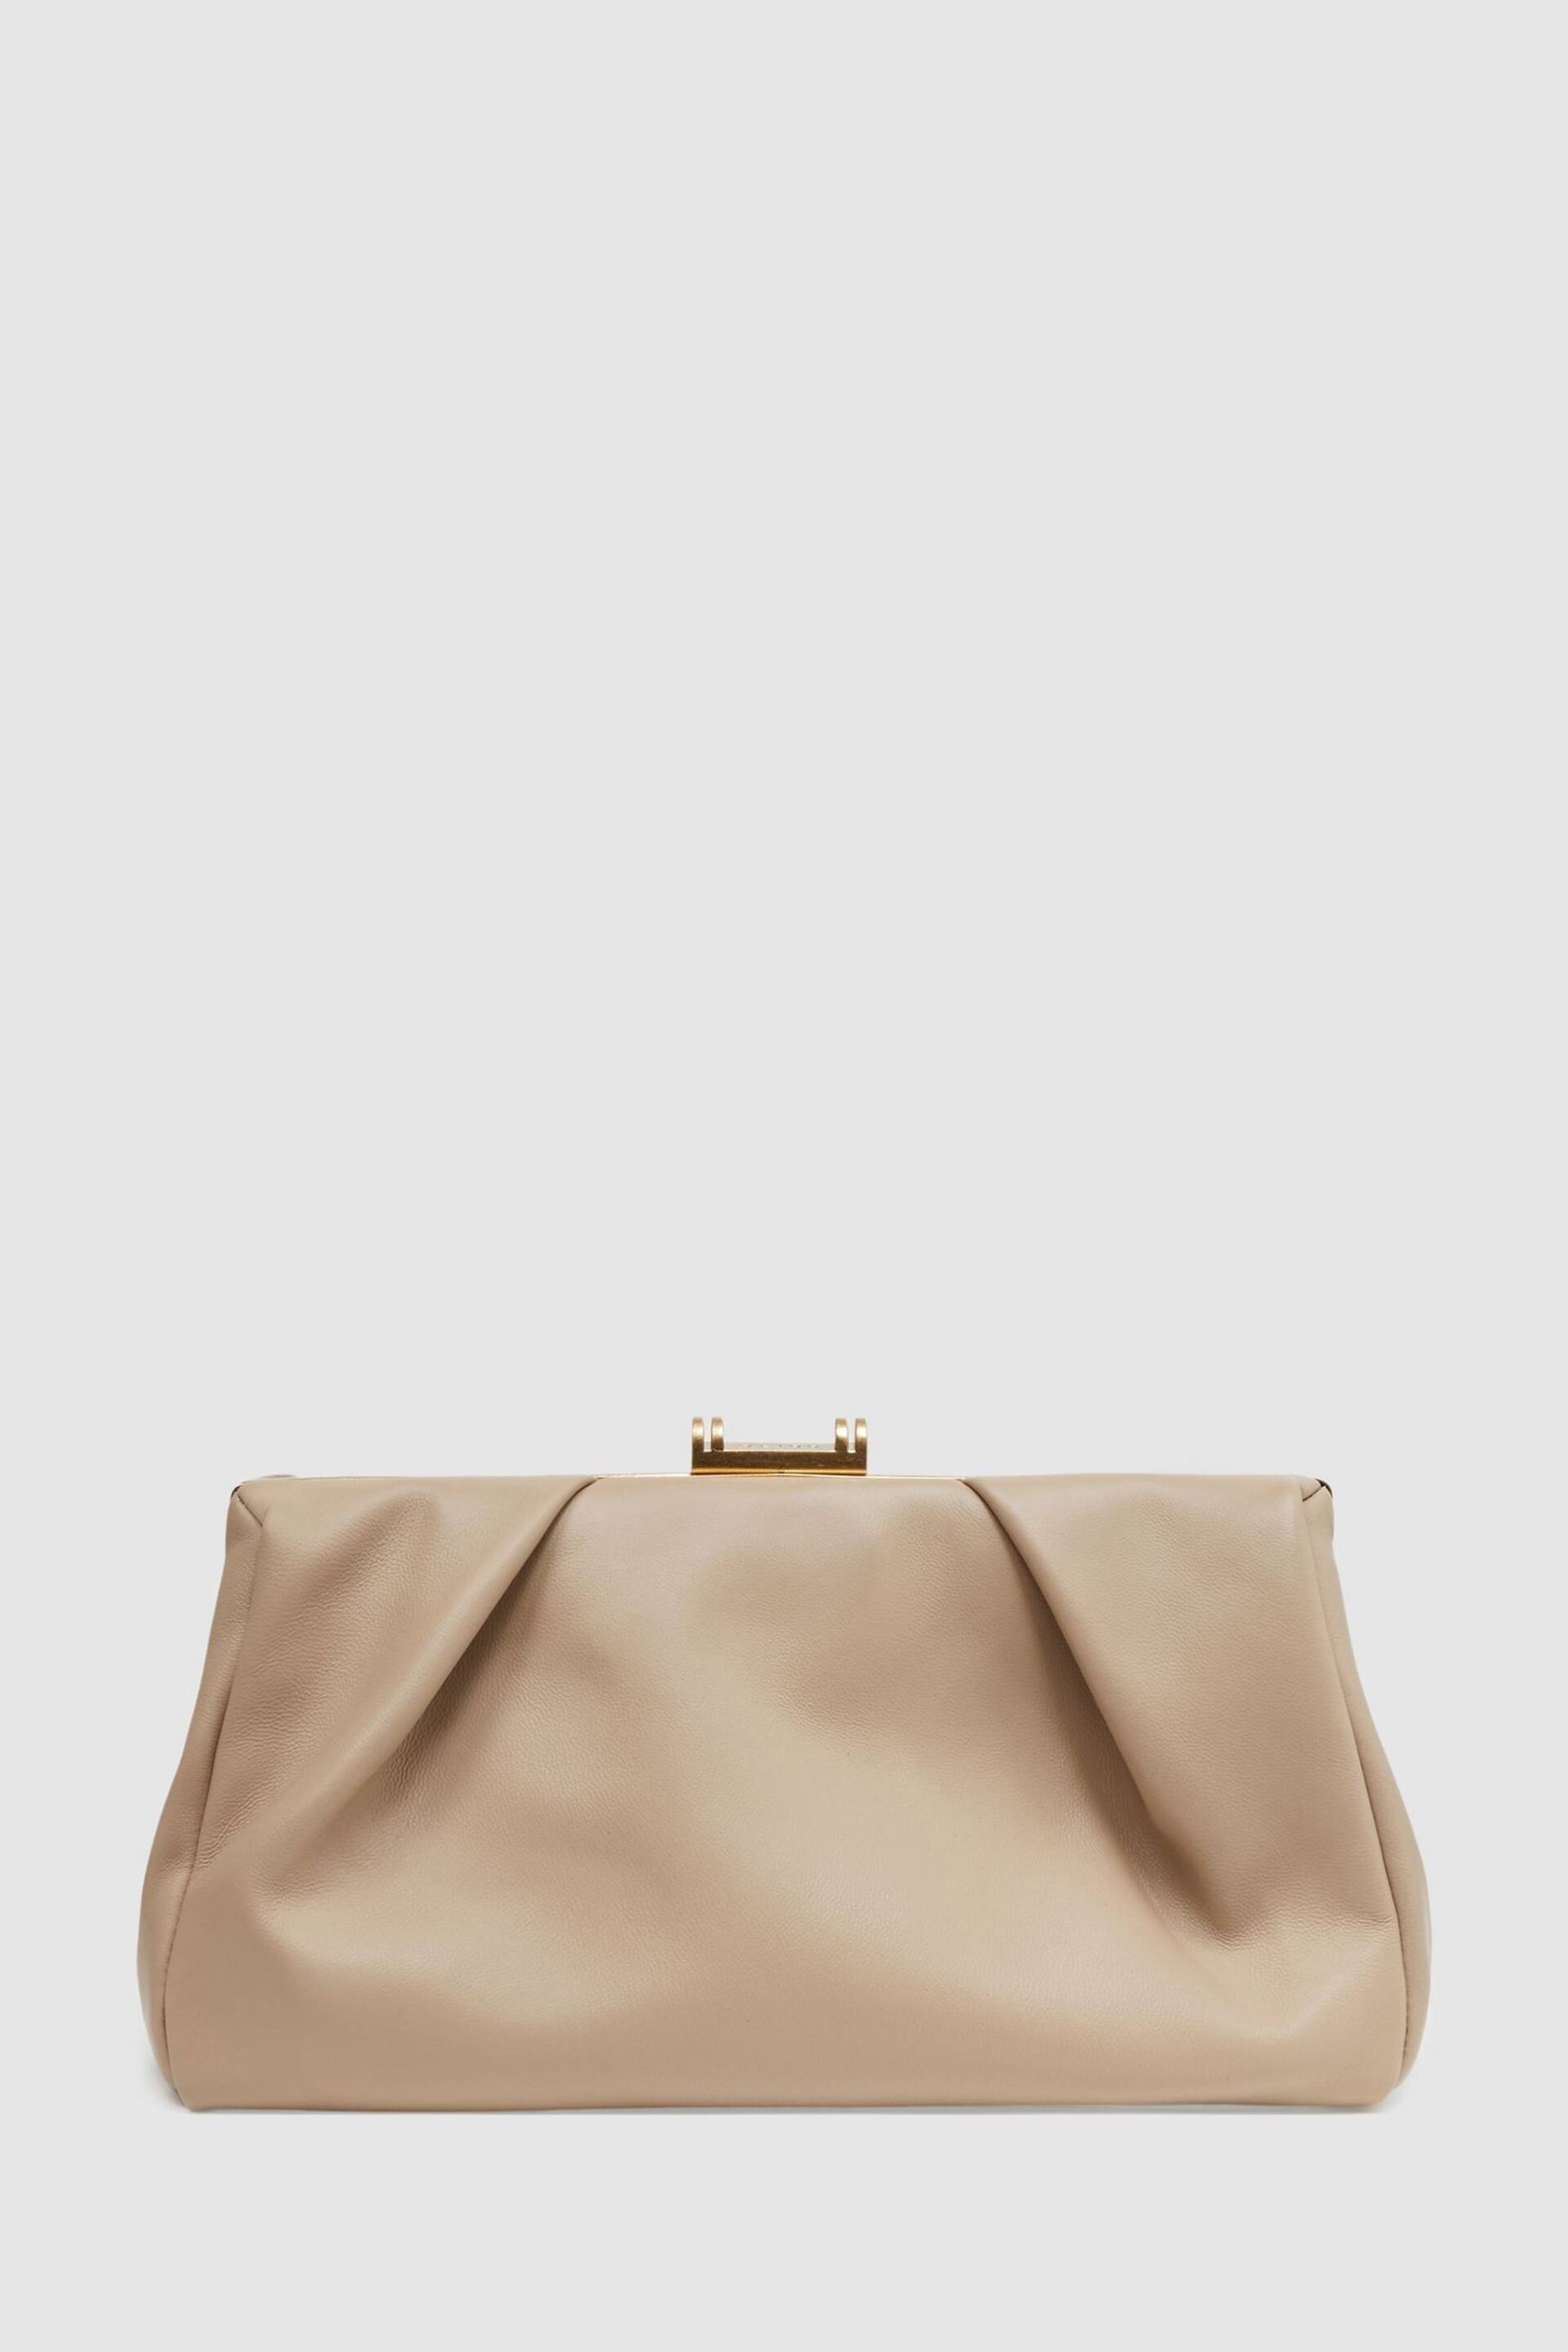 Reiss Taupe Madison Leather Clutch Bag - Image 1 of 5